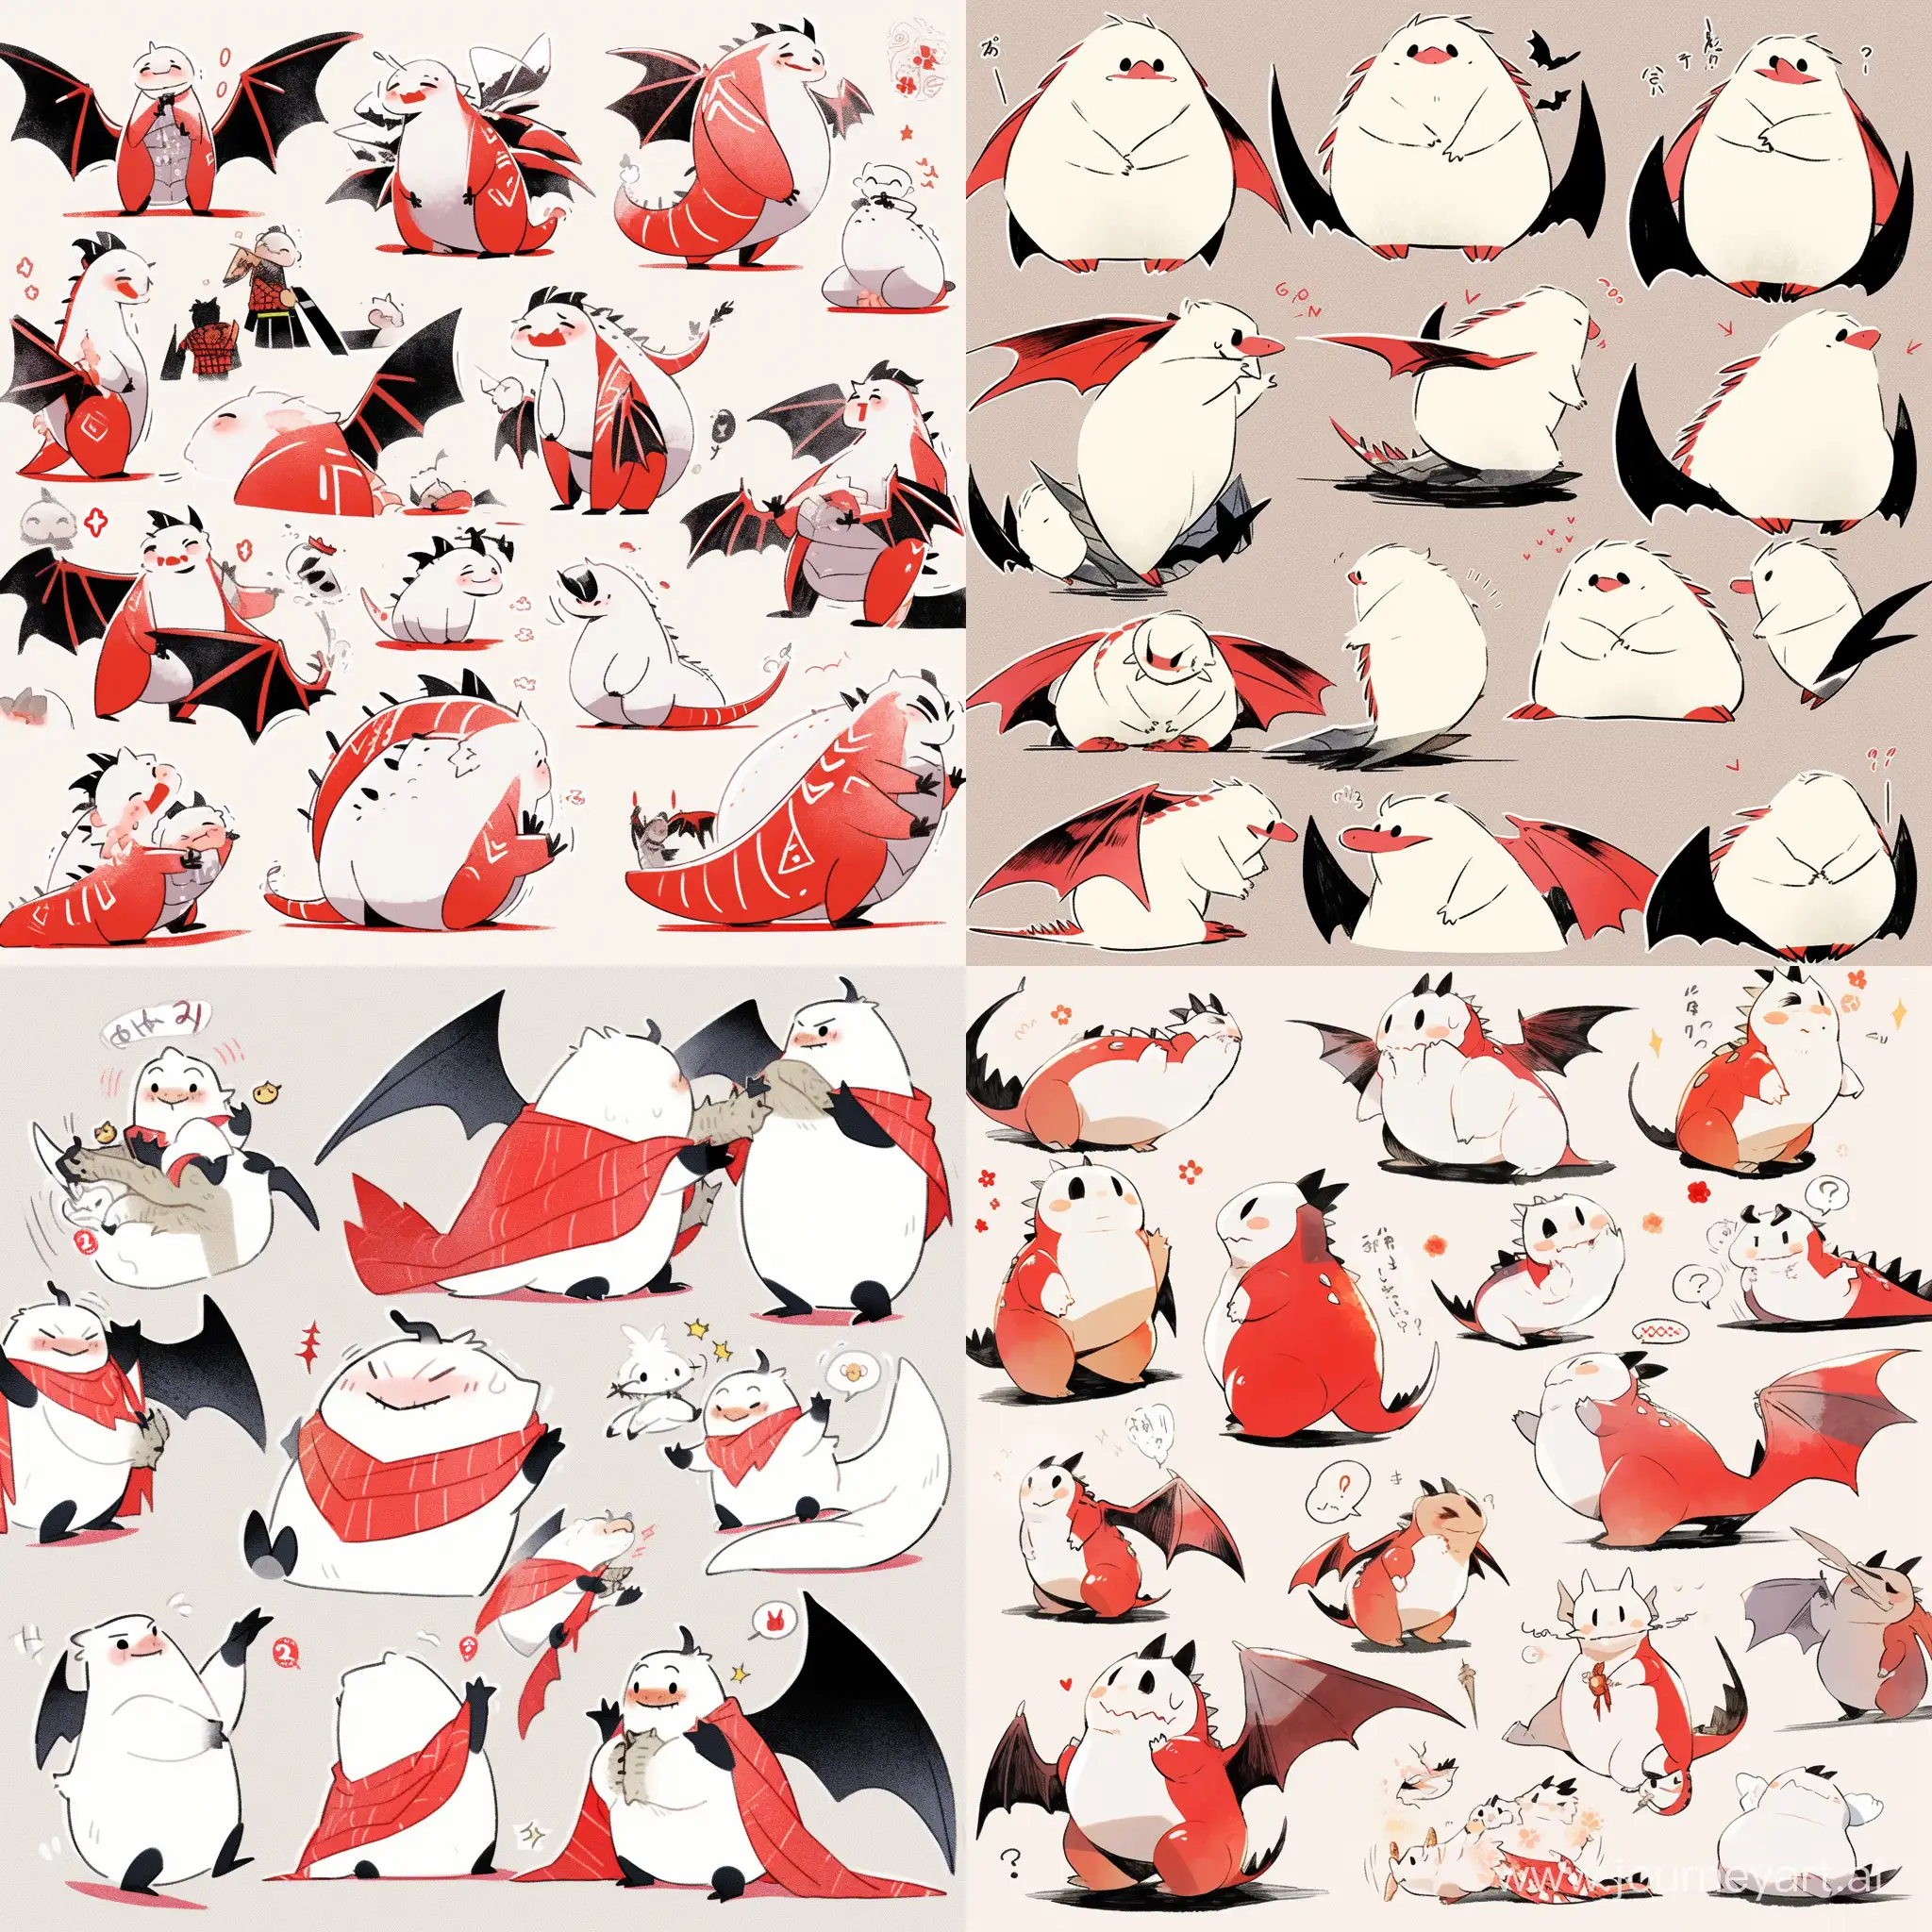 Fat and cute, Red and white  Dragon, emoji,anthropomorphic style, Disney style, black strokes, different emotions,multiple poss and expressions,8k --niji 5 --style cute